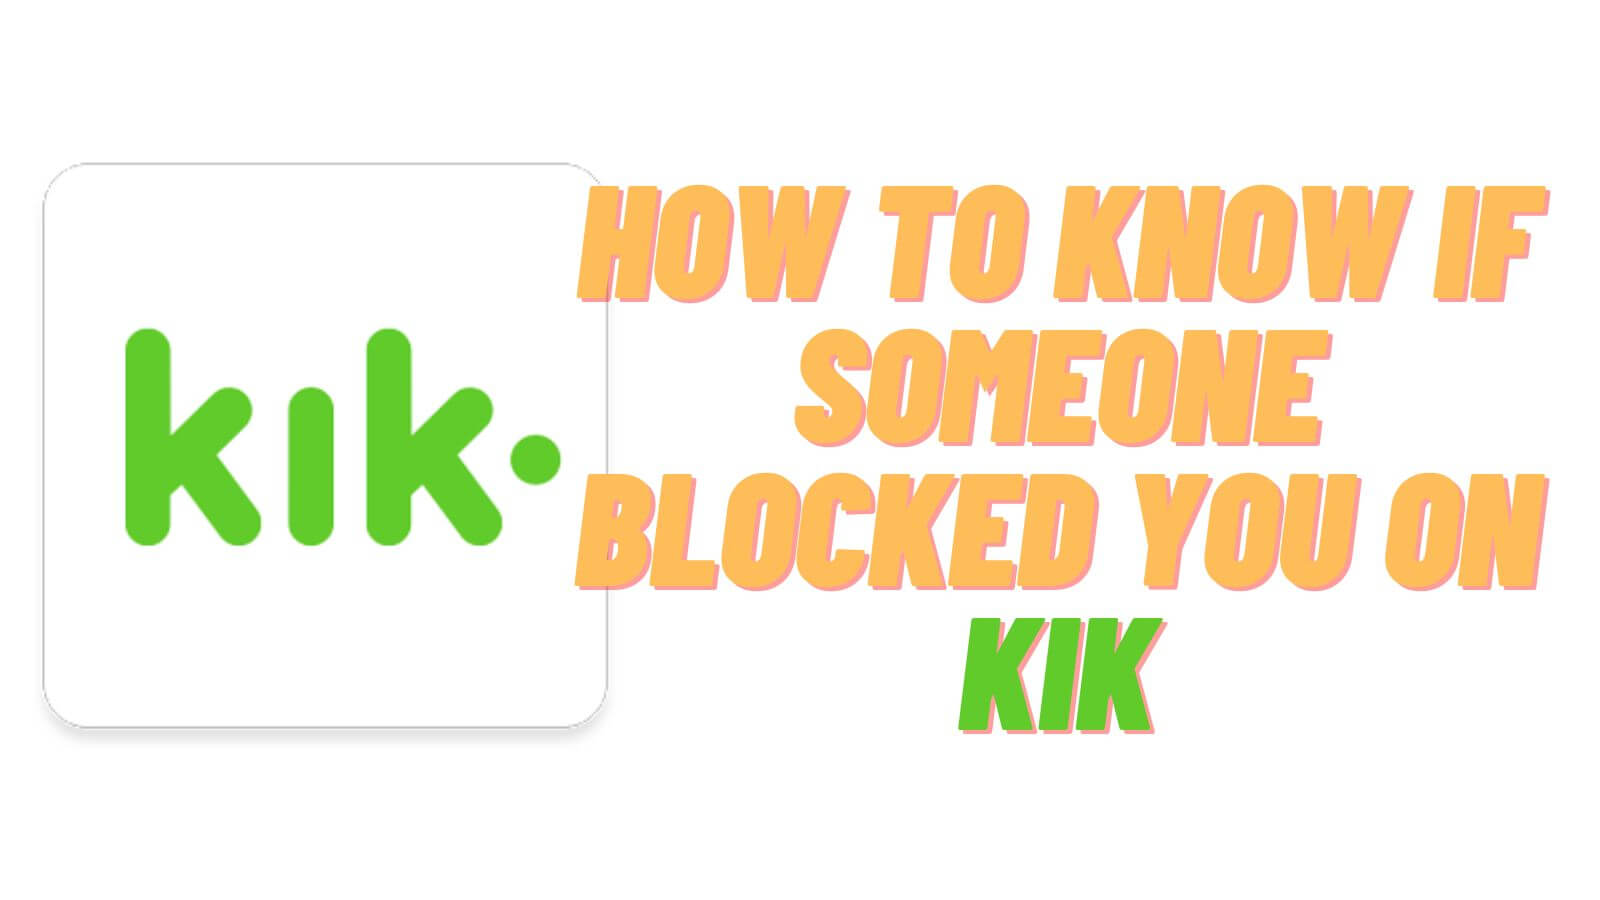 How to Know If Someone Blocked You on Kik